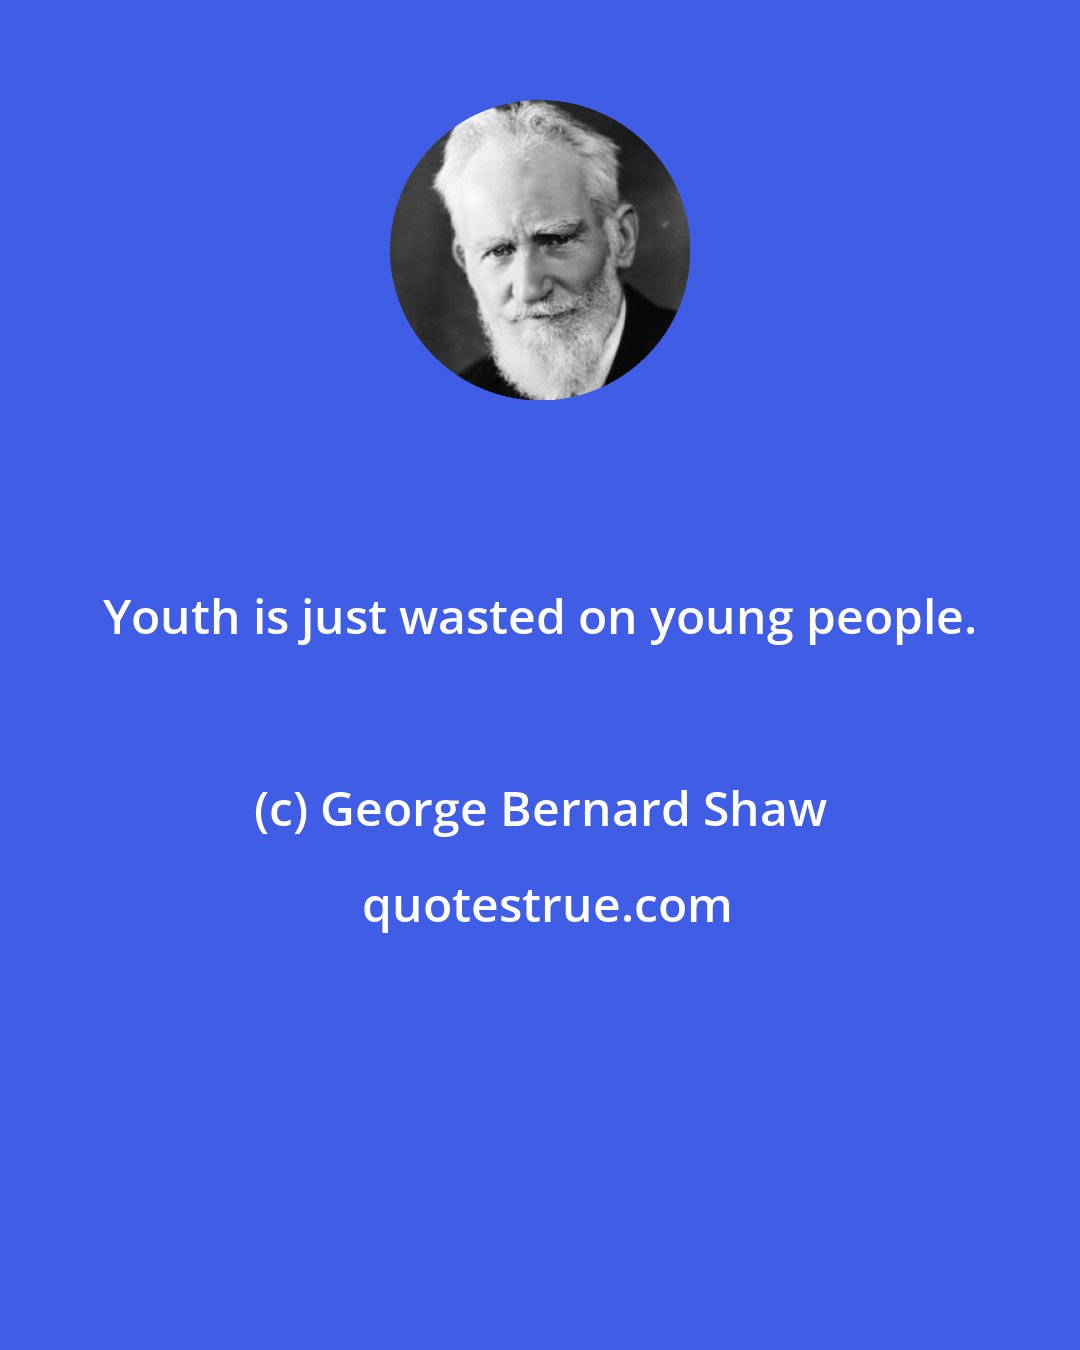 George Bernard Shaw: Youth is just wasted on young people.